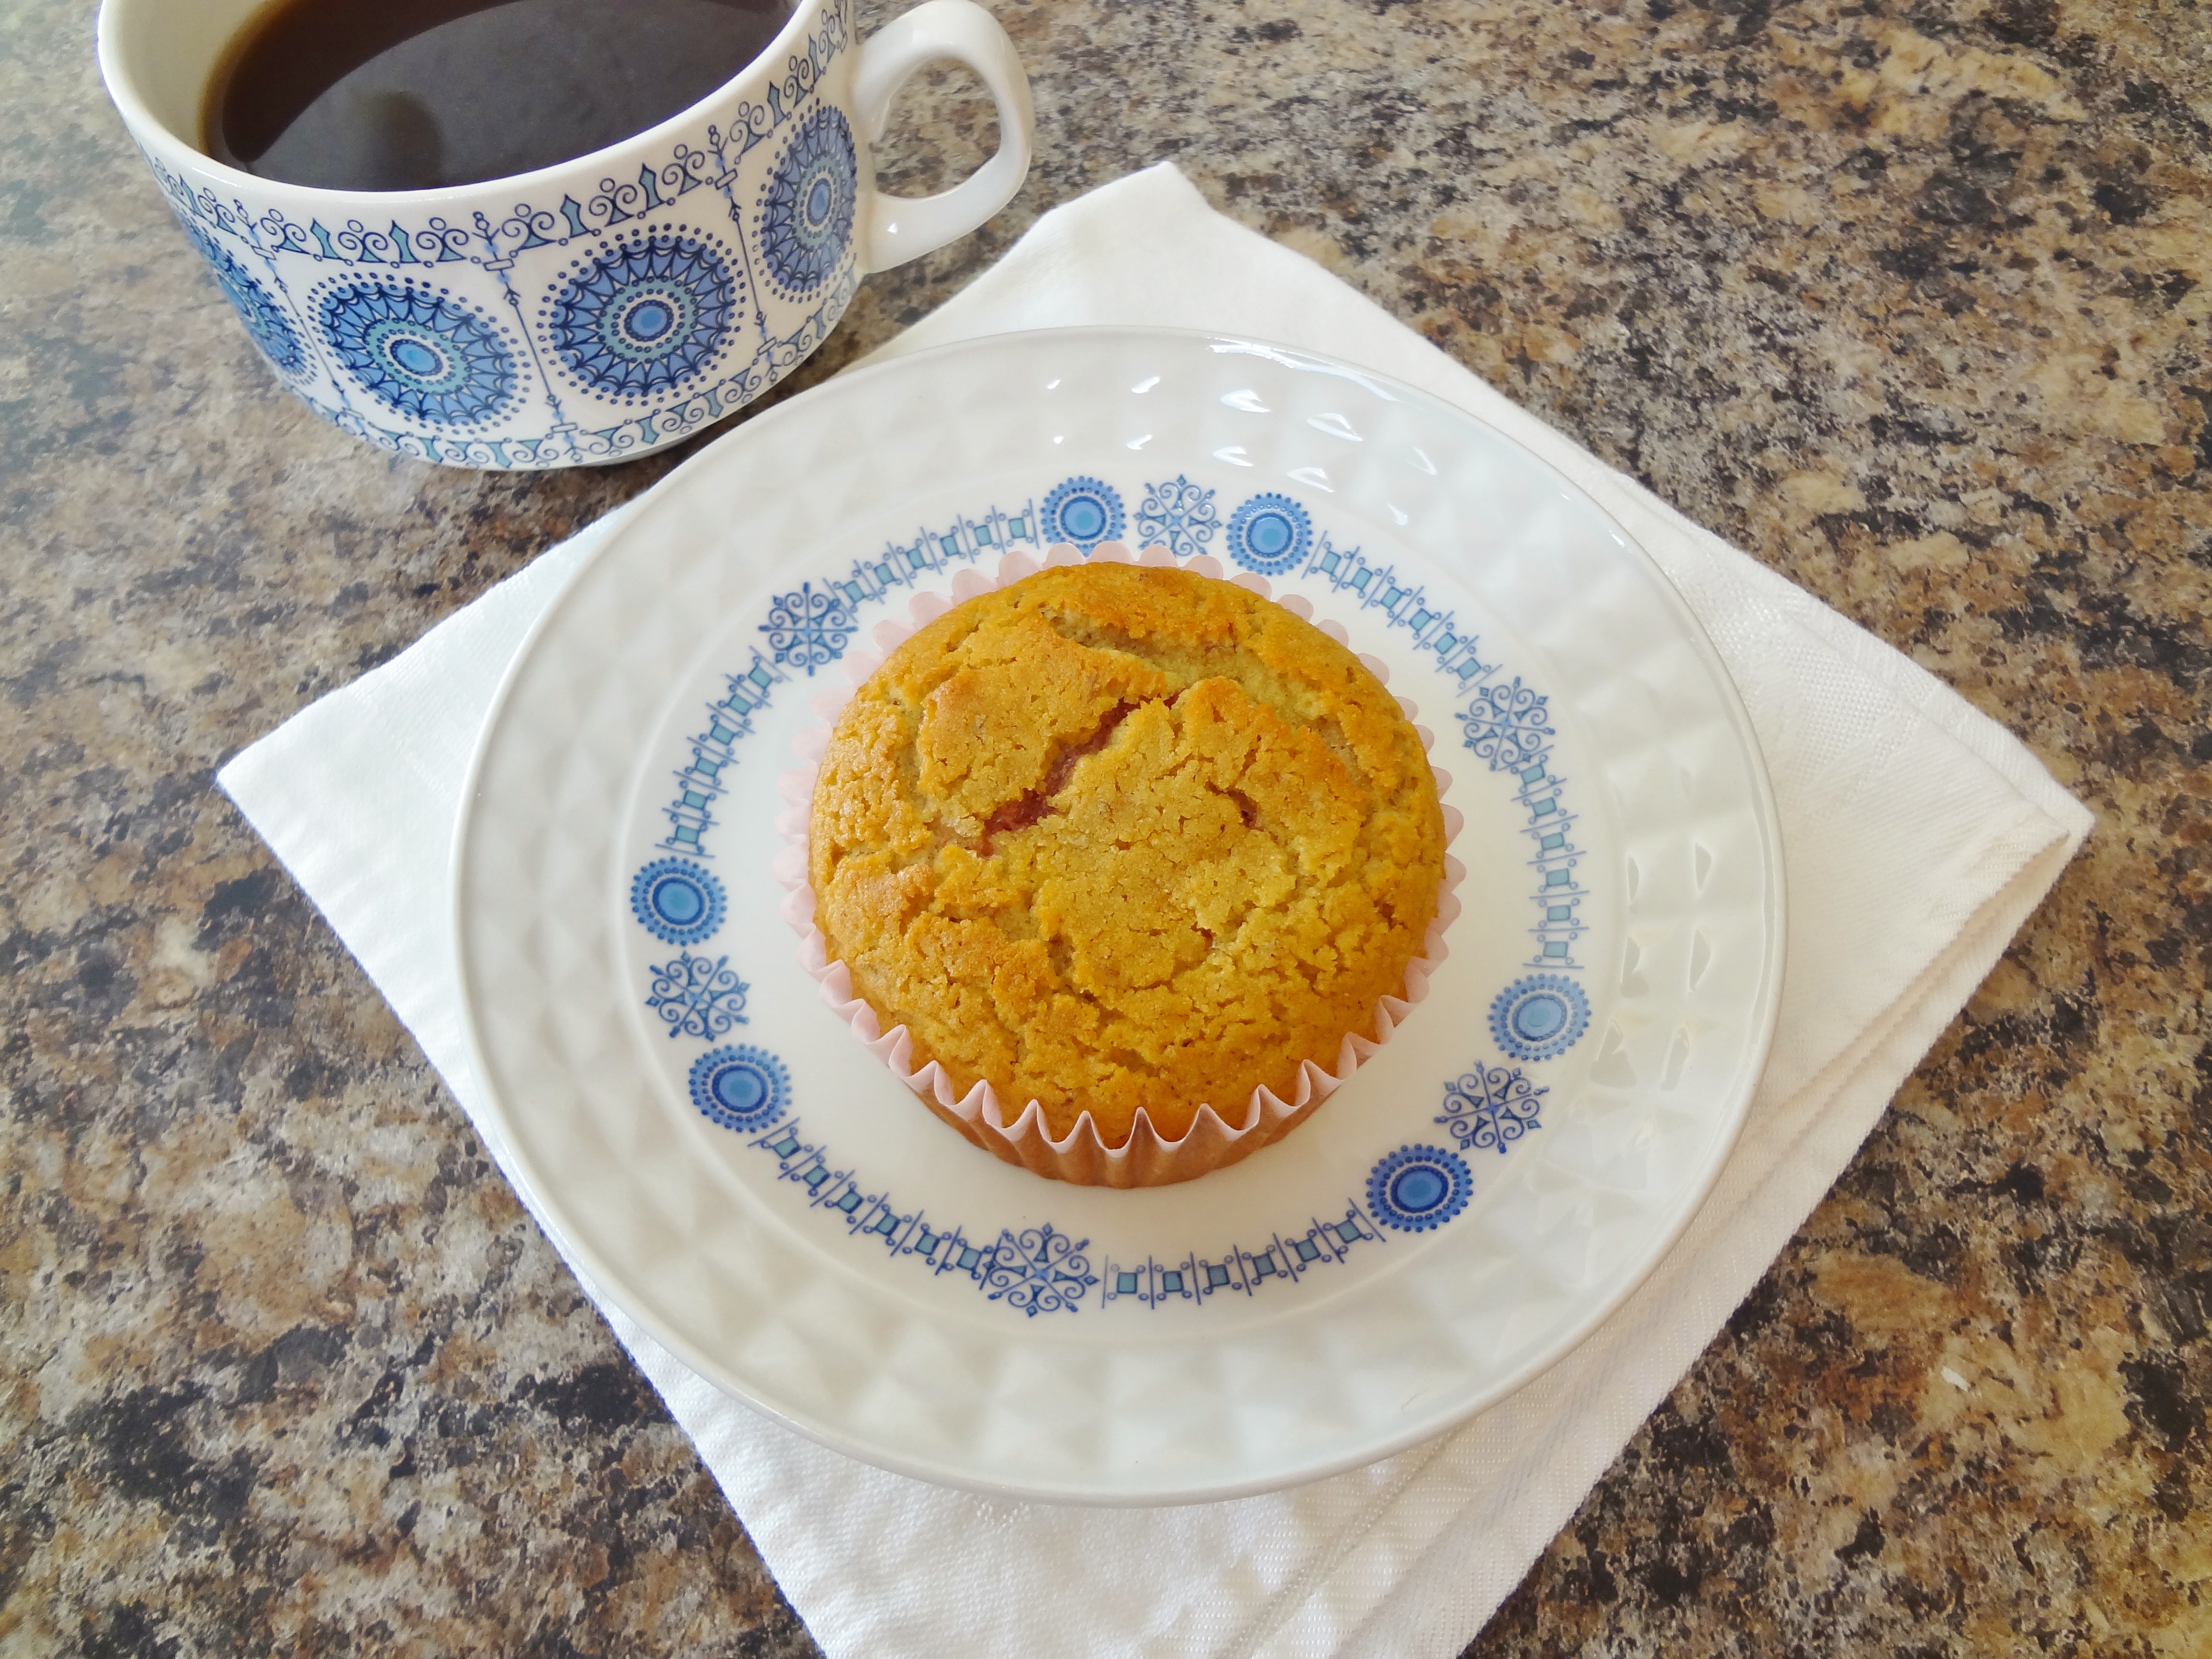 Missing PB&J treats? If you have peanut allergies, here's a fun breakfast you can enjoy: SunButter Jam Muffins, they are also gluten free and vegan! - @TheFitCookie #glutenfree #vegan